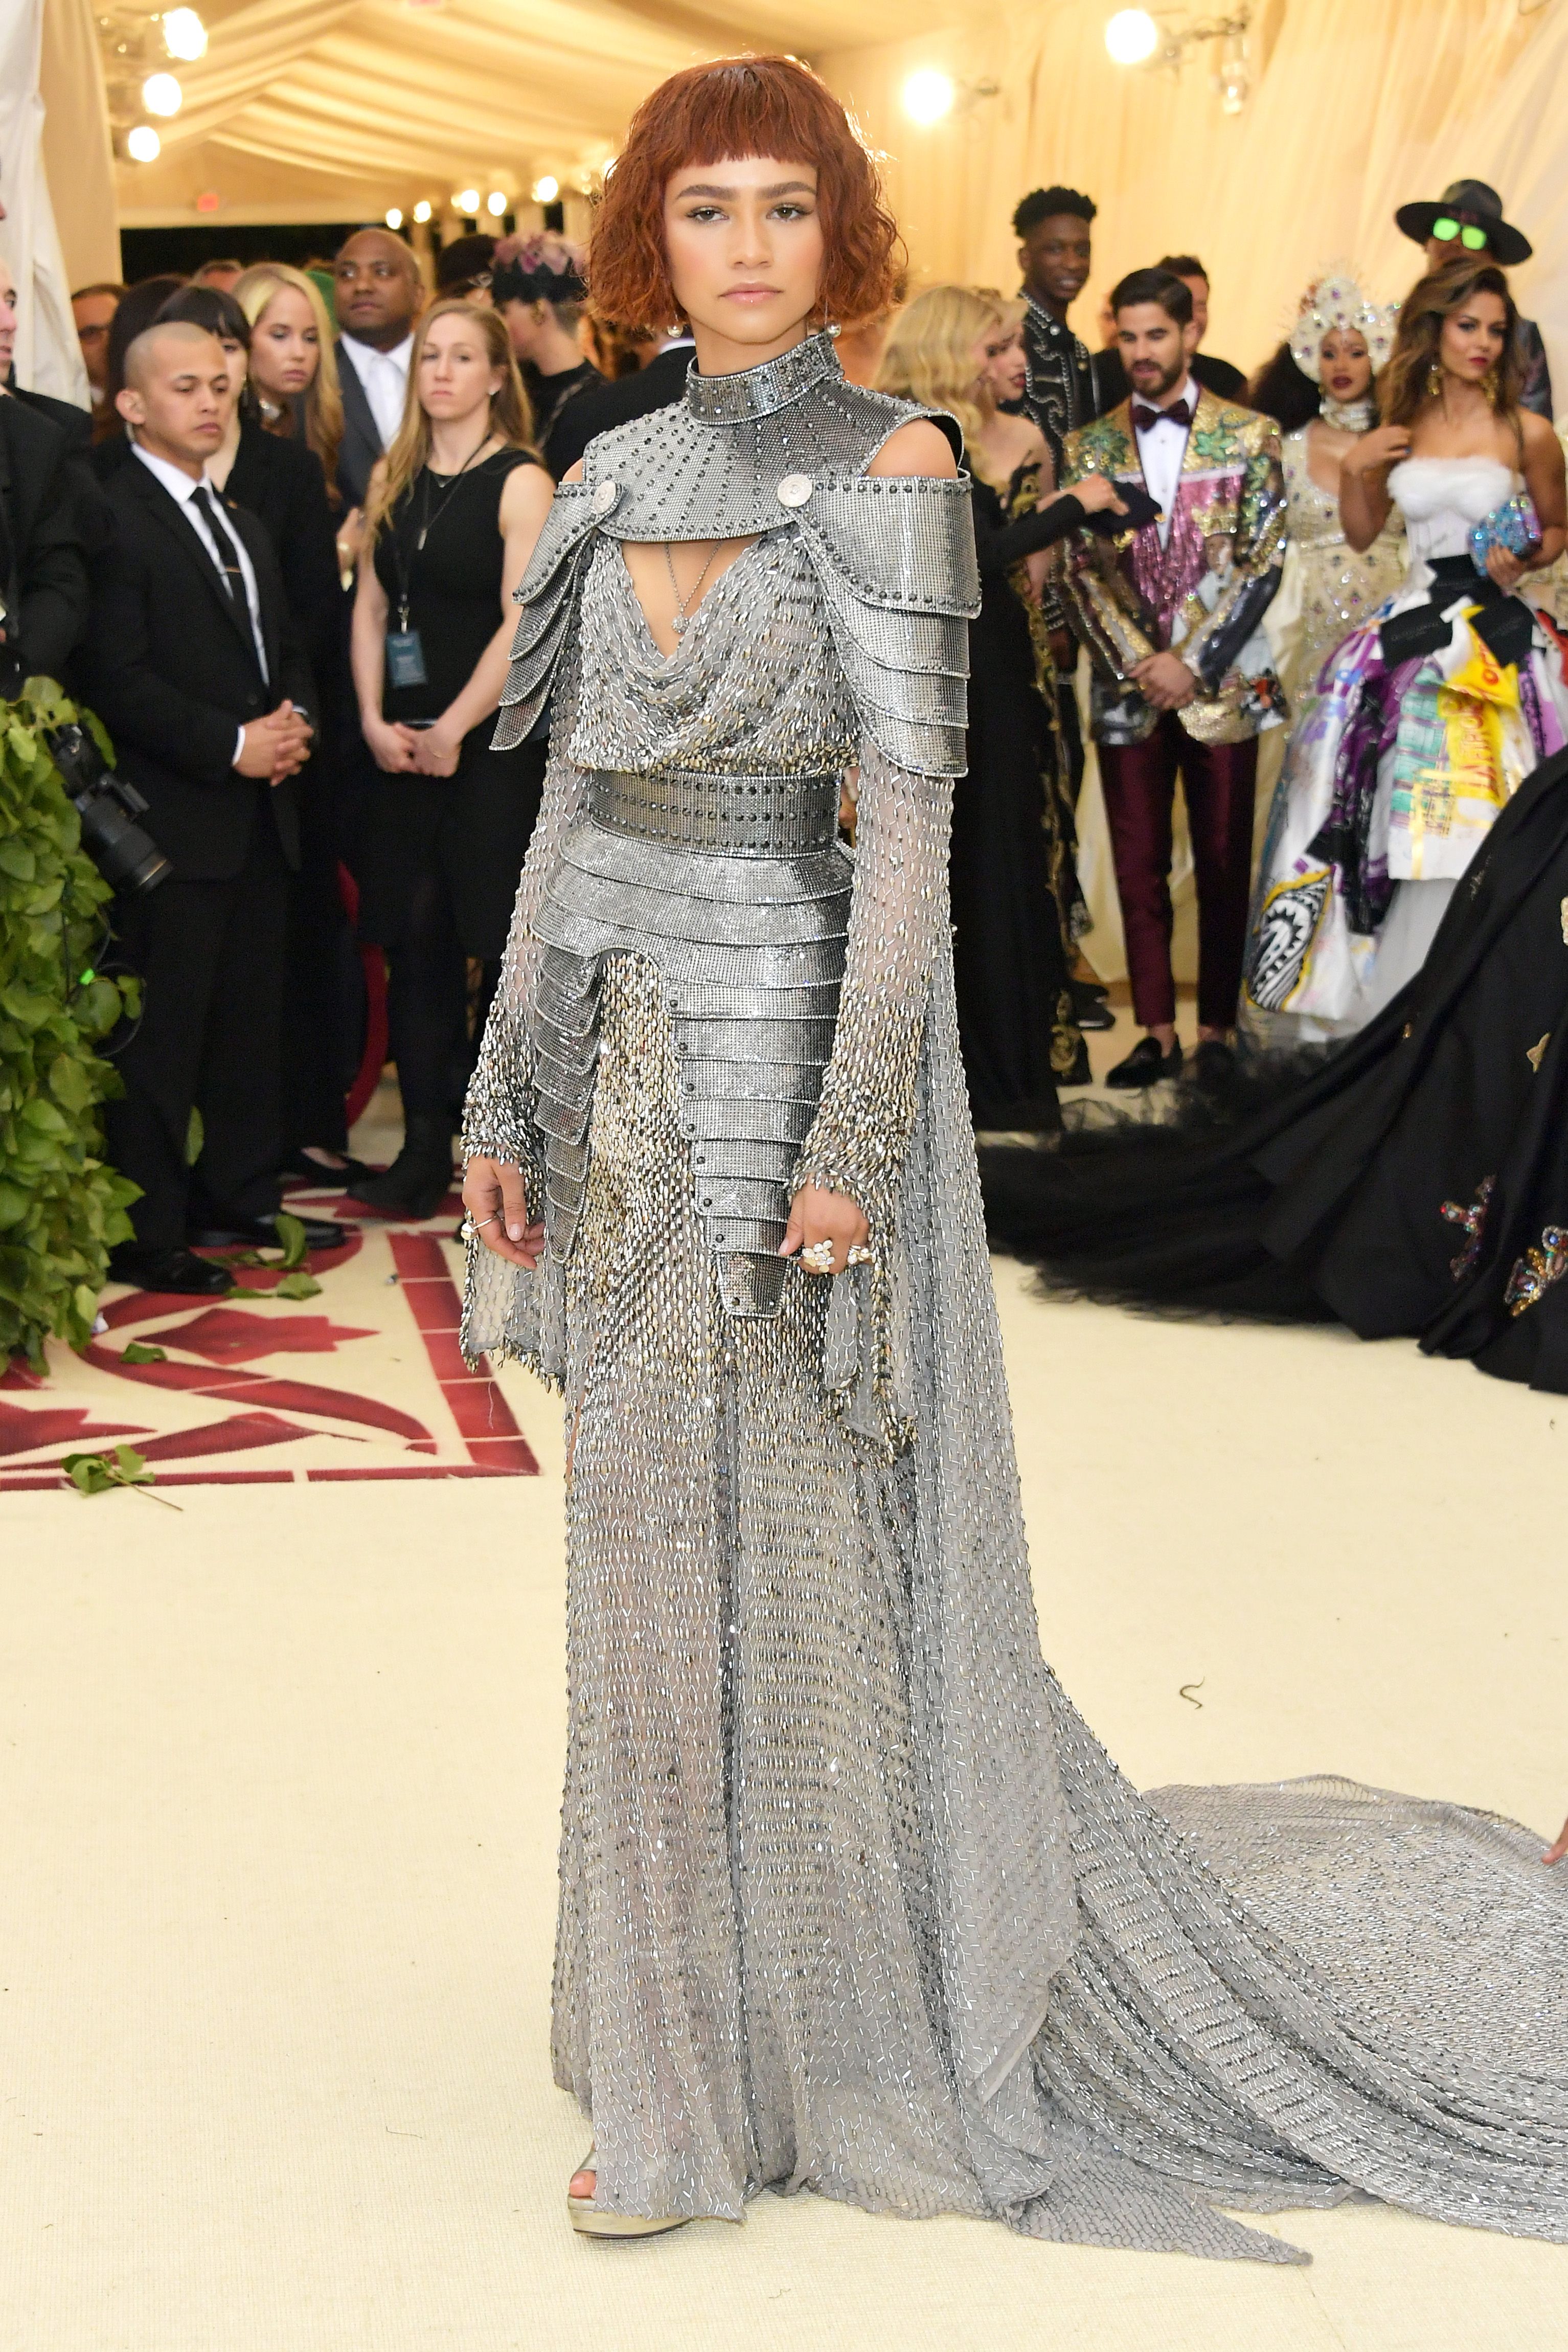 Met Gala 2018: The most over-the-top celeb looks